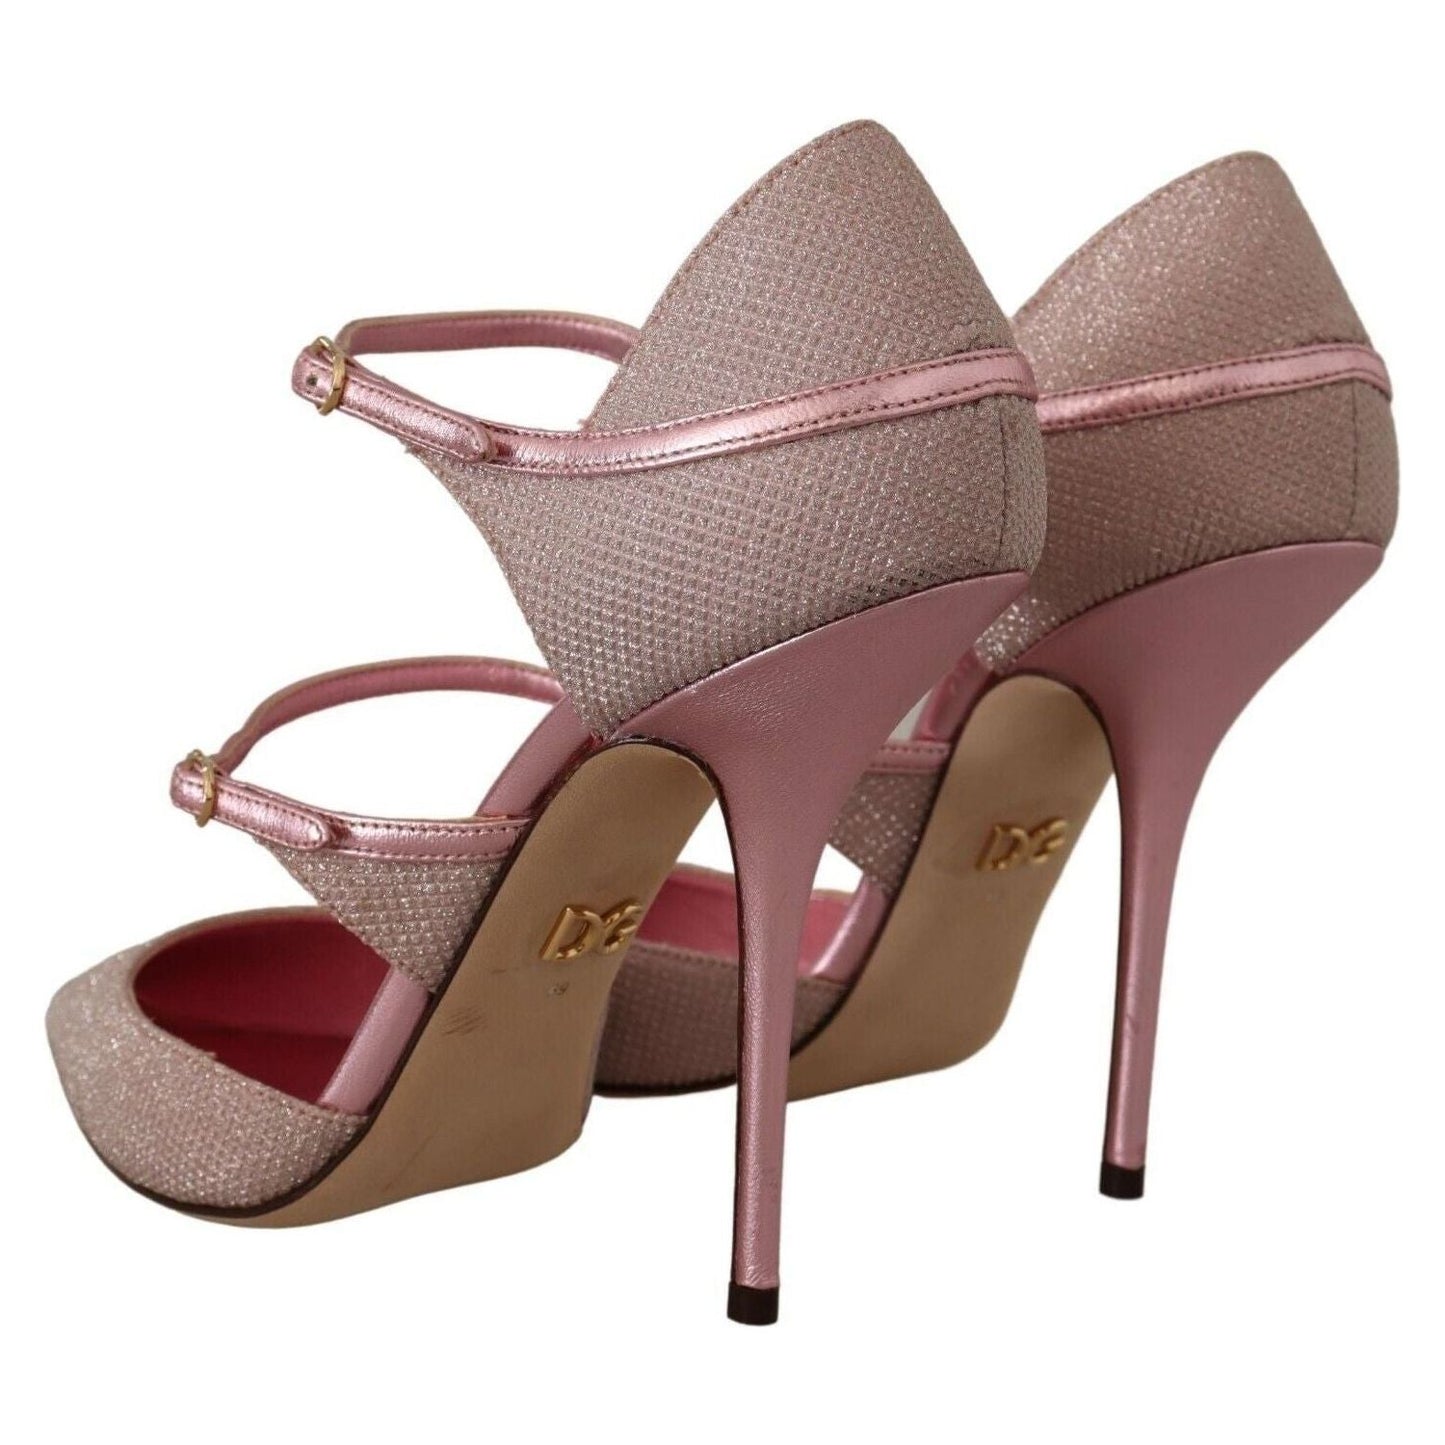 Dolce & Gabbana Pink Glitter High Heel Sandals pink-glittered-strappy-sandals-mary-jane-shoes